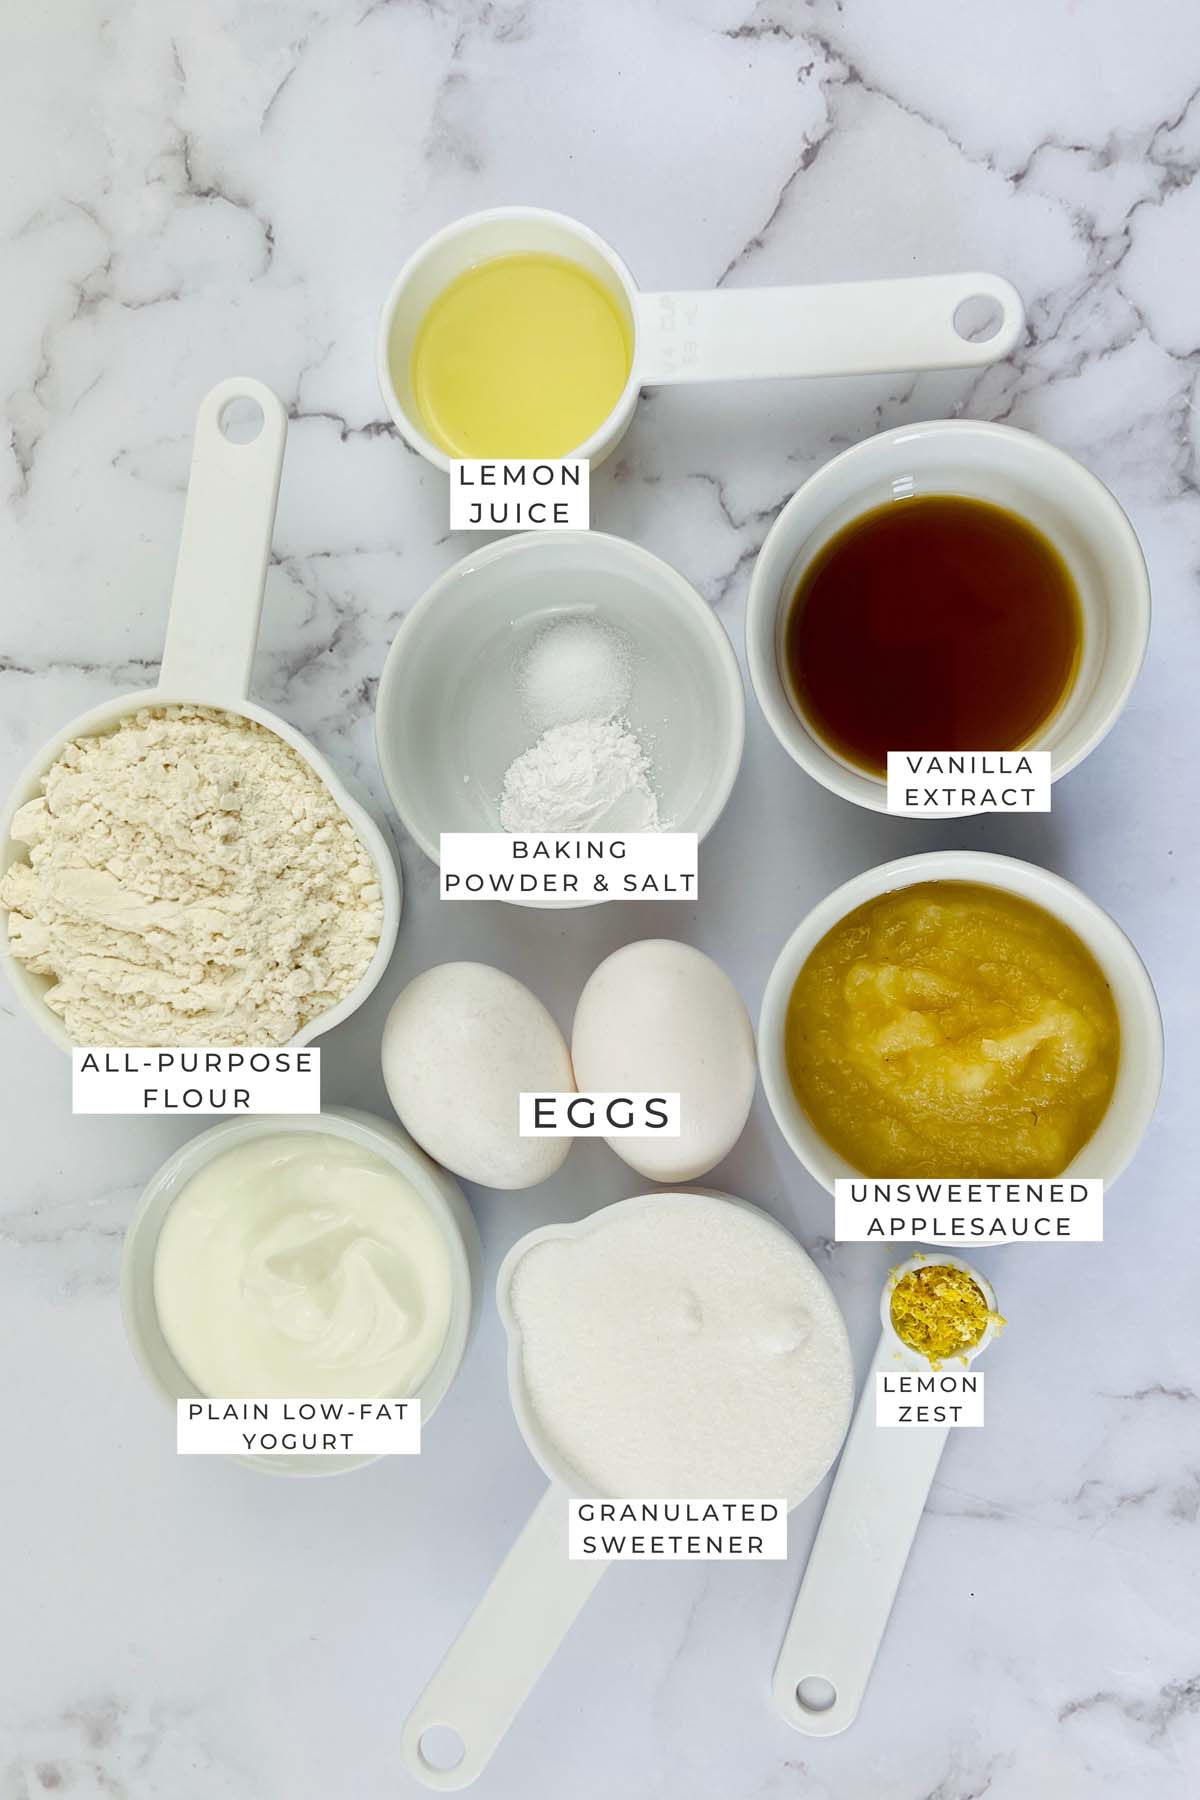 Labeled ingredients for the lemon cake.